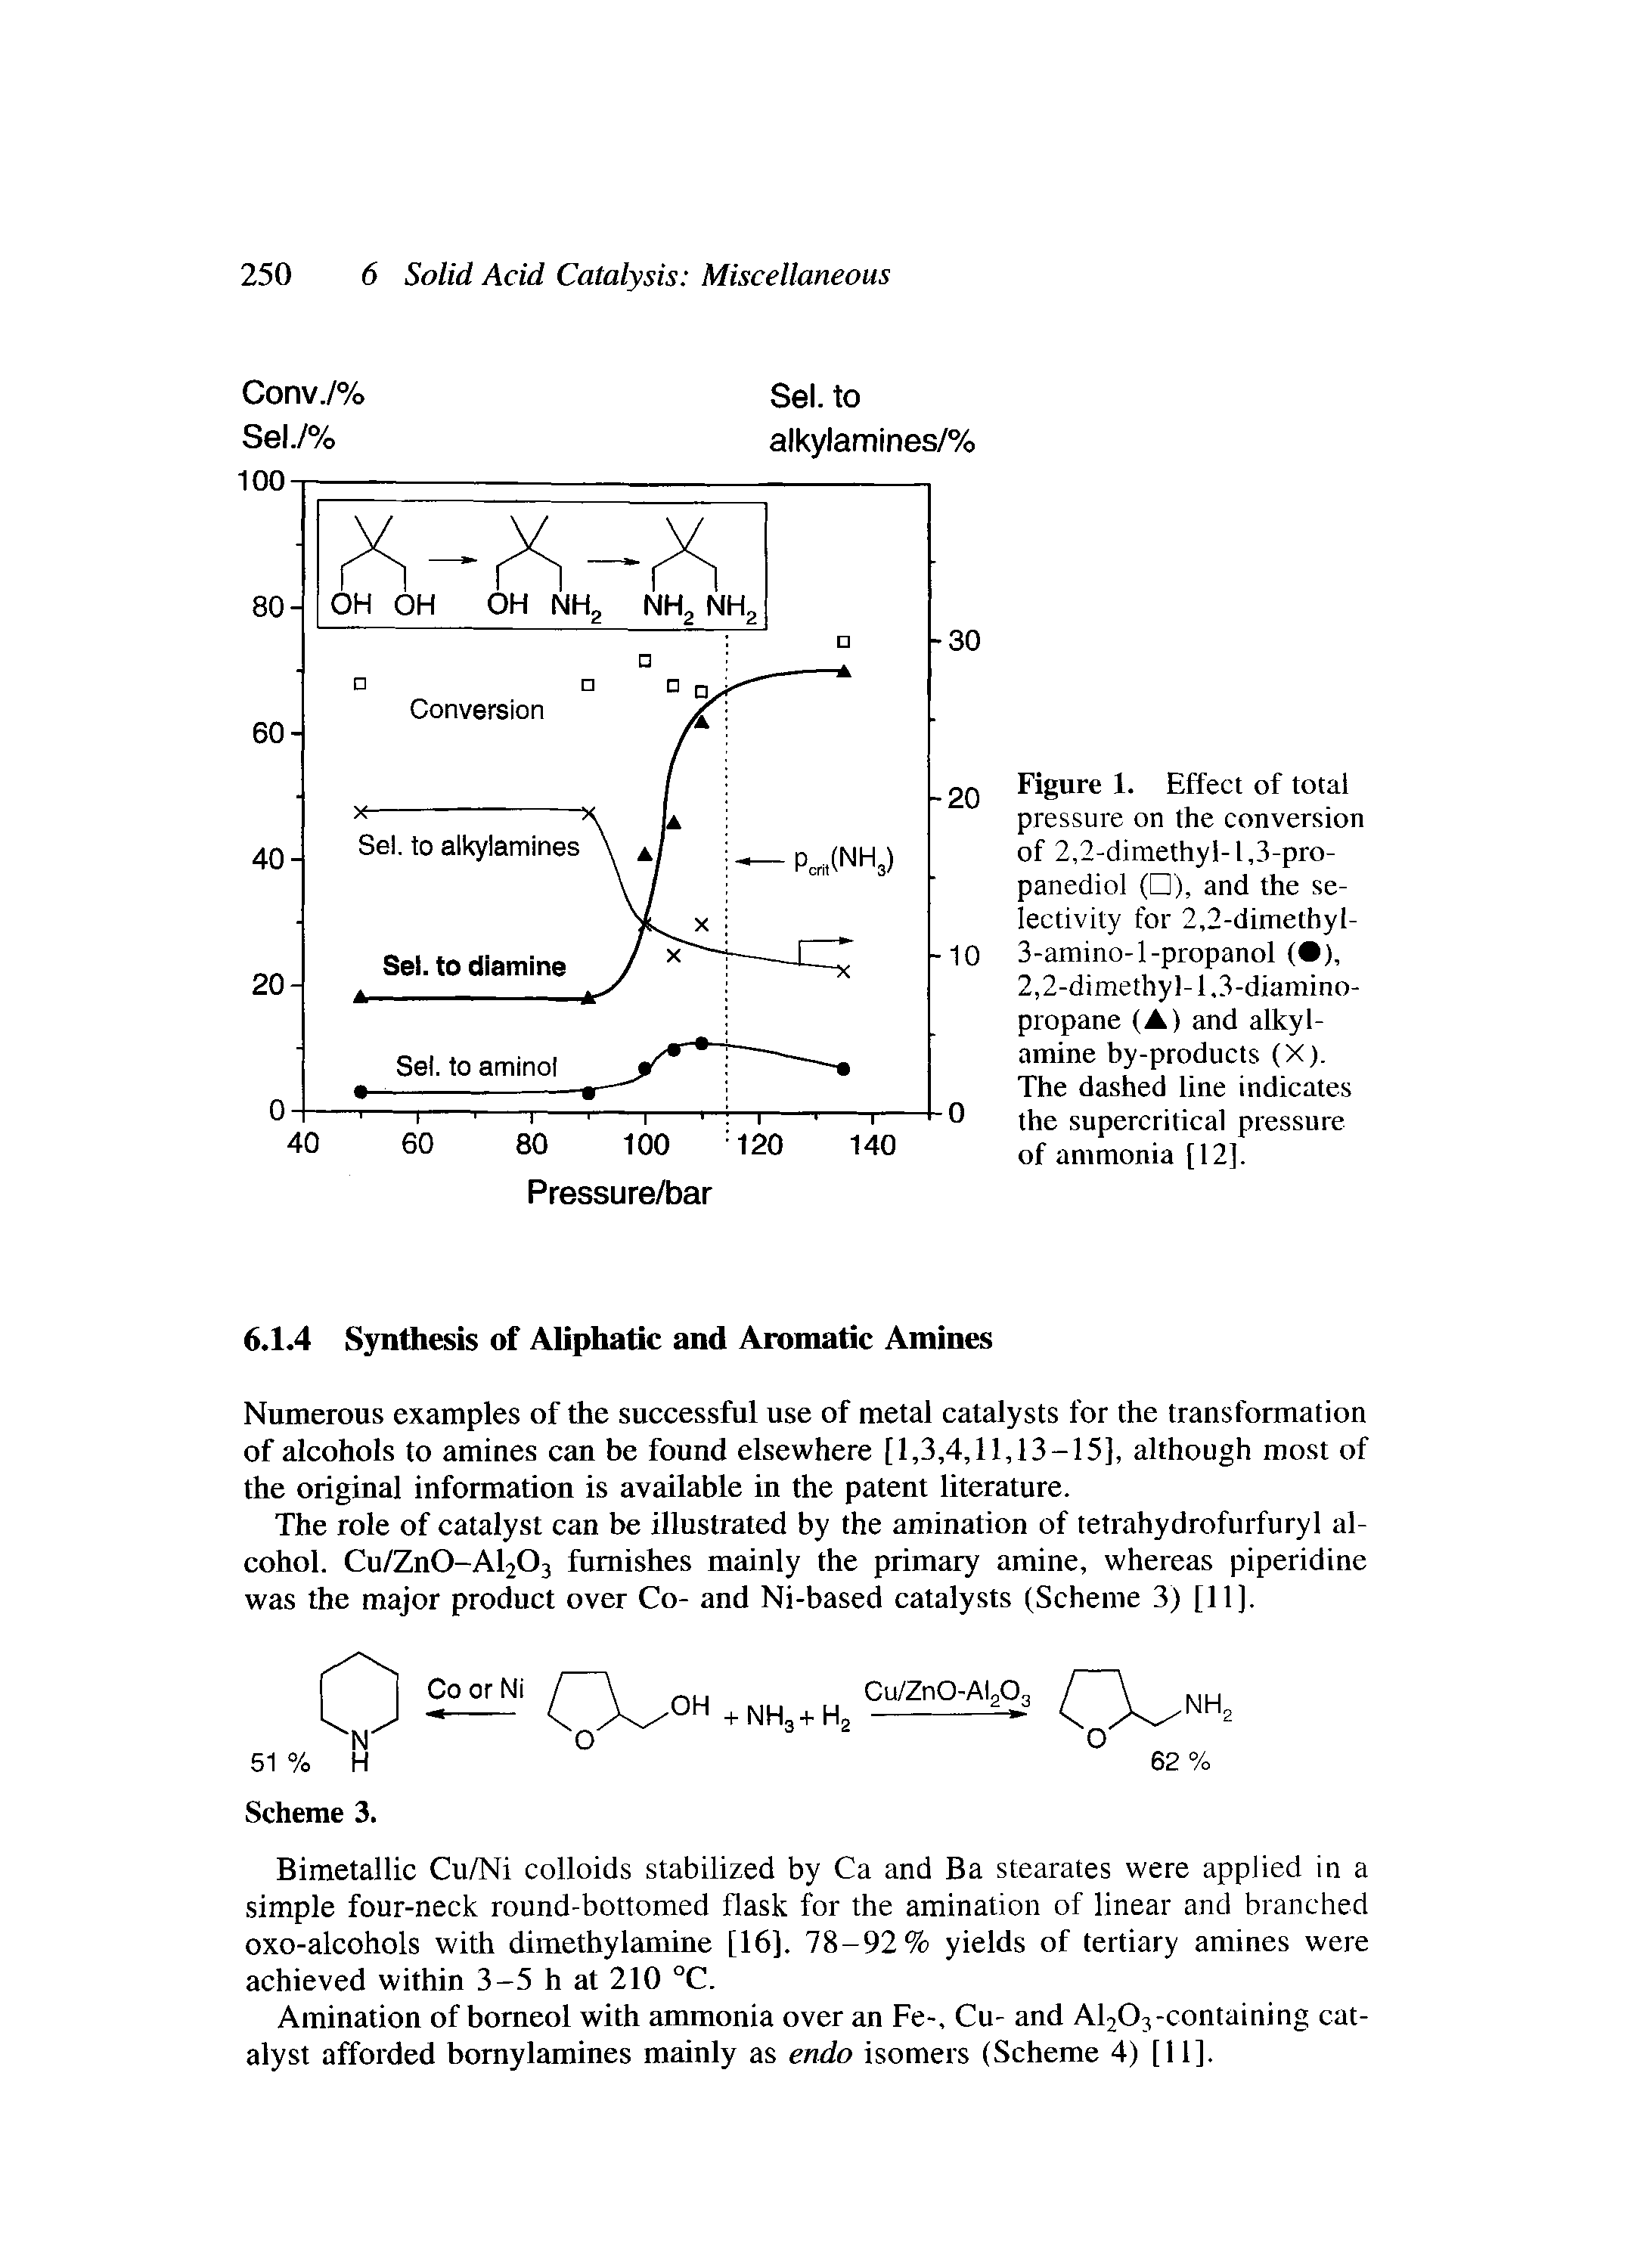 Figure 1. Effect of total pressure on the conversion of 2,2-dimethyl-1,3-propanediol ( ), and the selectivity for 2,2-dimethyl-3-amino-l-propanol ( ),...